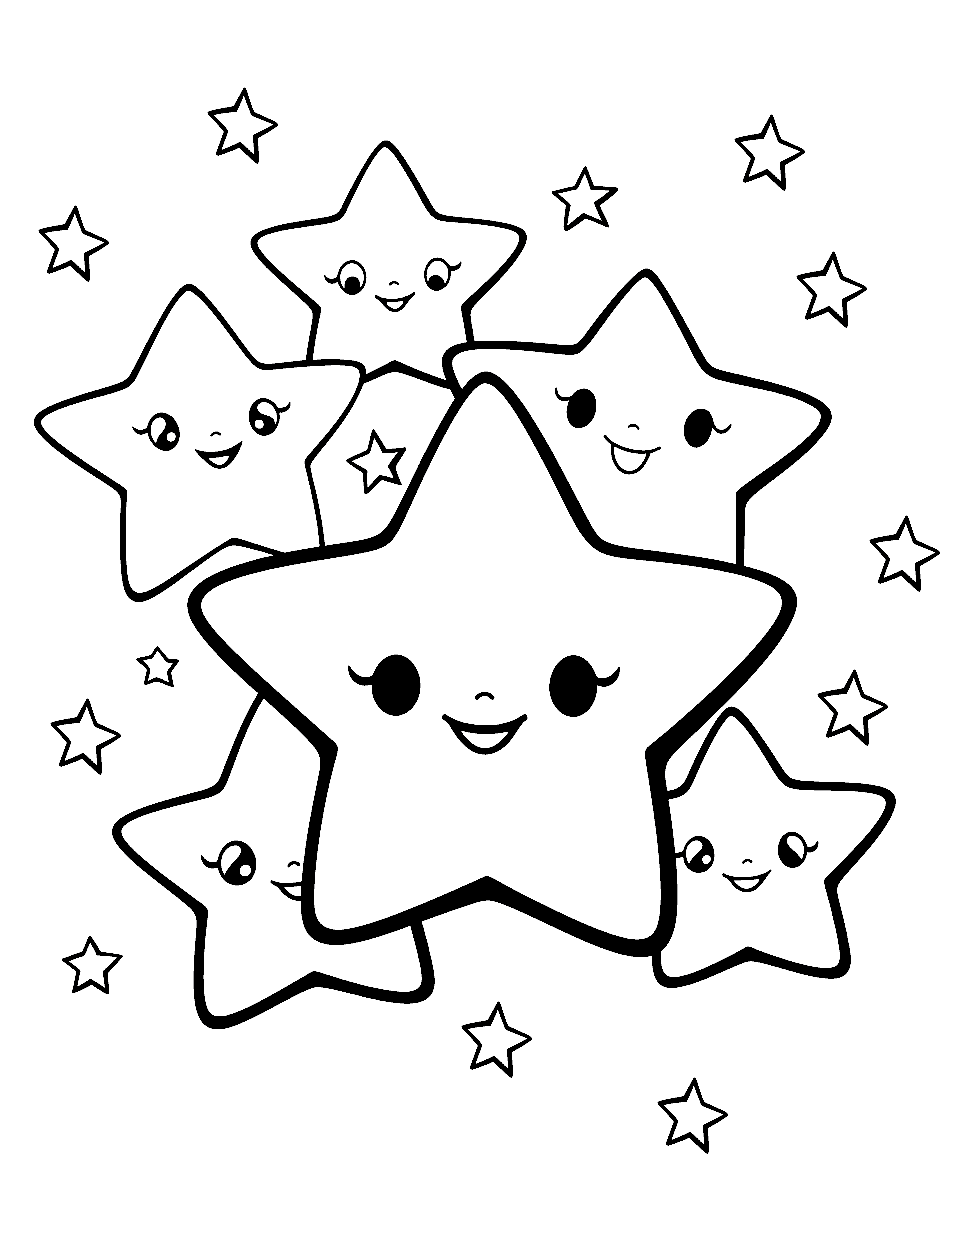 Kawaii Star Friends Coloring Page - A group of cute, kawaii-style stars with cheerful expressions.